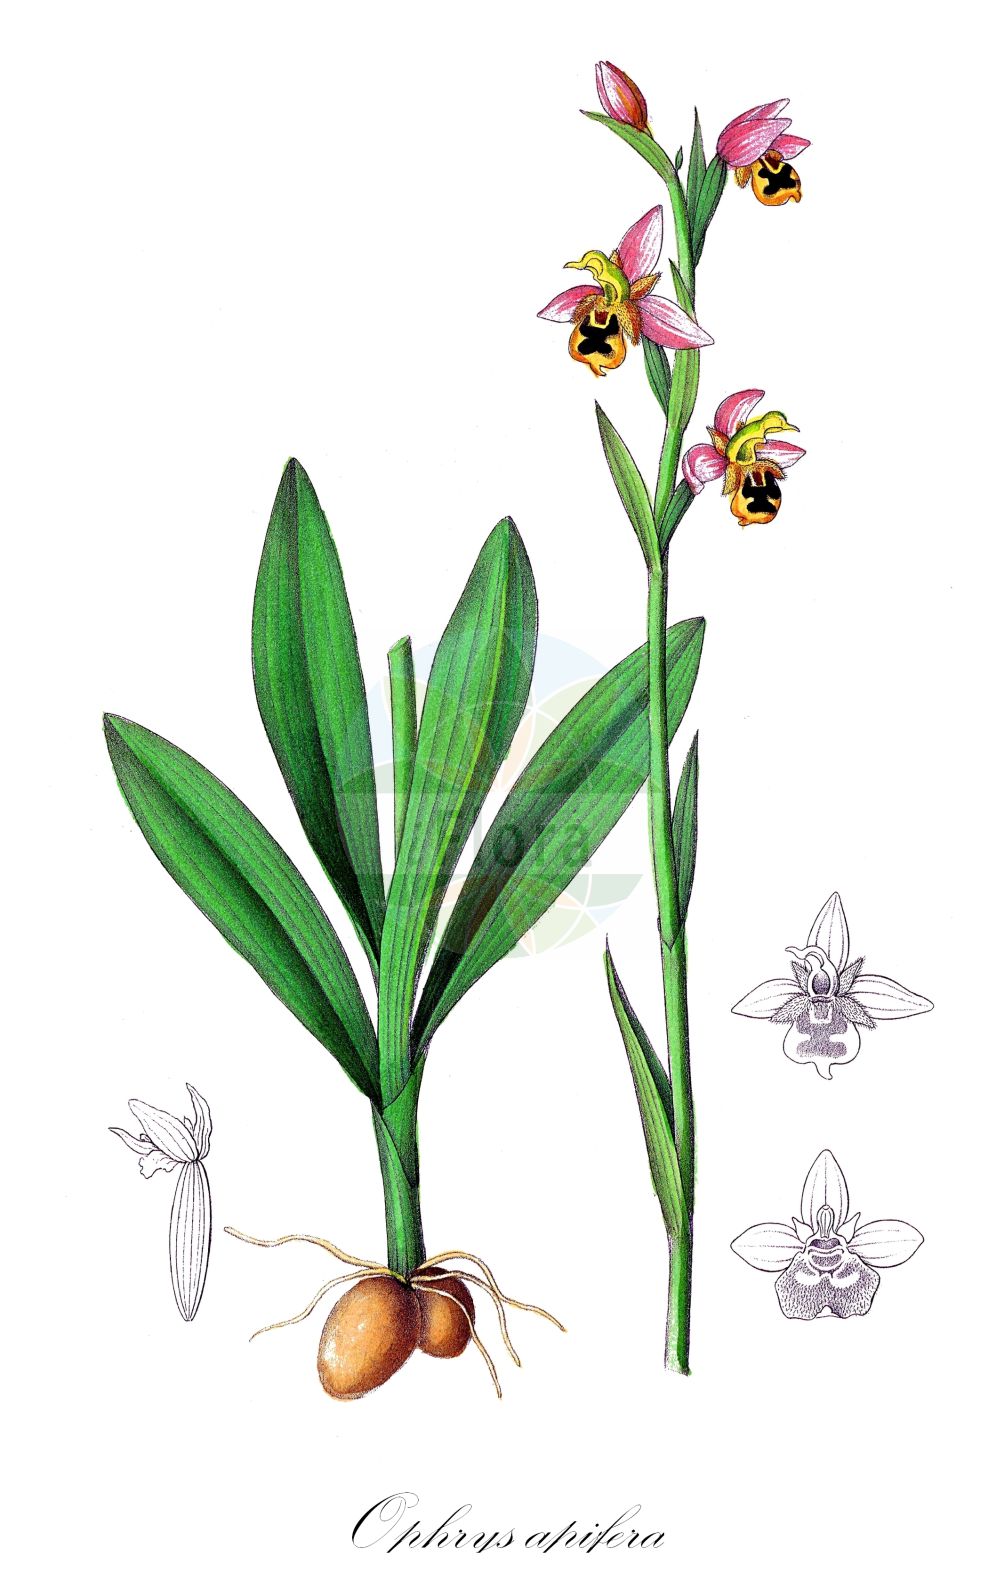 Historische Abbildung von Ophrys apifera (Bienen-Ragwurz - Bee Orchid). Das Bild zeigt Blatt, Bluete, Frucht und Same. ---- Historical Drawing of Ophrys apifera (Bienen-Ragwurz - Bee Orchid). The image is showing leaf, flower, fruit and seed.(Ophrys apifera,Bienen-Ragwurz,Bee Orchid,Arachnites apifera,Ophrys albiflora,Ophrys apifera,Ophrys aquisgranensis,Ophrys asilifera,Ophrys austriaca,Ophrys bicolor,Ophrys botteronii,Ophrys chlorantha,Ophrys epeirophora,Ophrys friburgensis,Ophrys immaculata,Ophrys integra,Ophrys jurana,Ophrys mangini,Ophrys purpurea,Ophrys ripaensis,Ophrys rostrata,Ophrys saraepontana,Ophrys trollii,Orchis apifera,Orchis holosericea,Orchis oestrifera,Bienen-Ragwurz,Bee Orchid,Ophrys,Ragwurz,Bee Orchid,Orchidaceae,Knabenkrautgewächse,Orchid family,Blatt,Bluete,Frucht,Same,leaf,flower,fruit,seed,Dietrich (1833-1844))